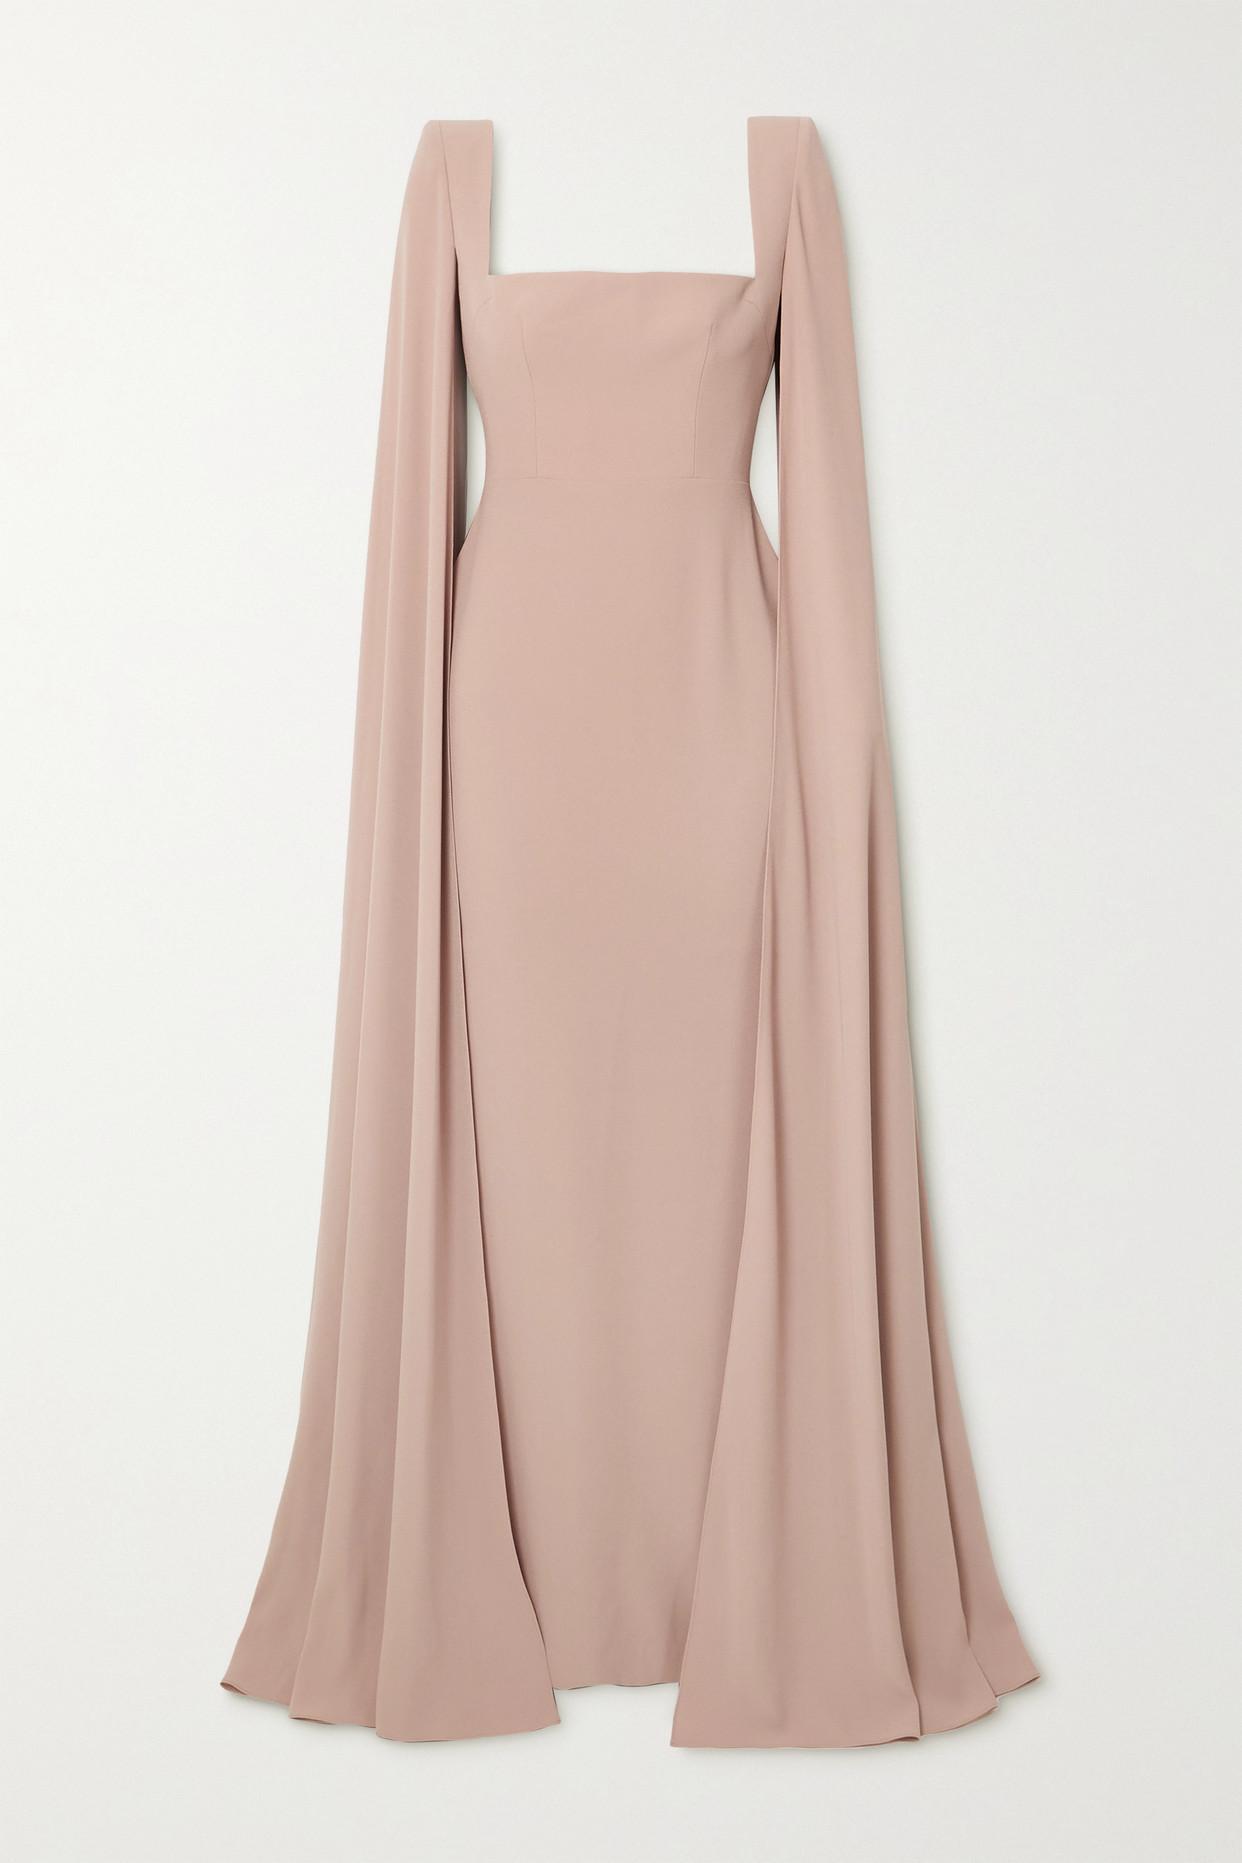 Alex Perry Auden Cape-effect Satin-crepe Gown in Natural